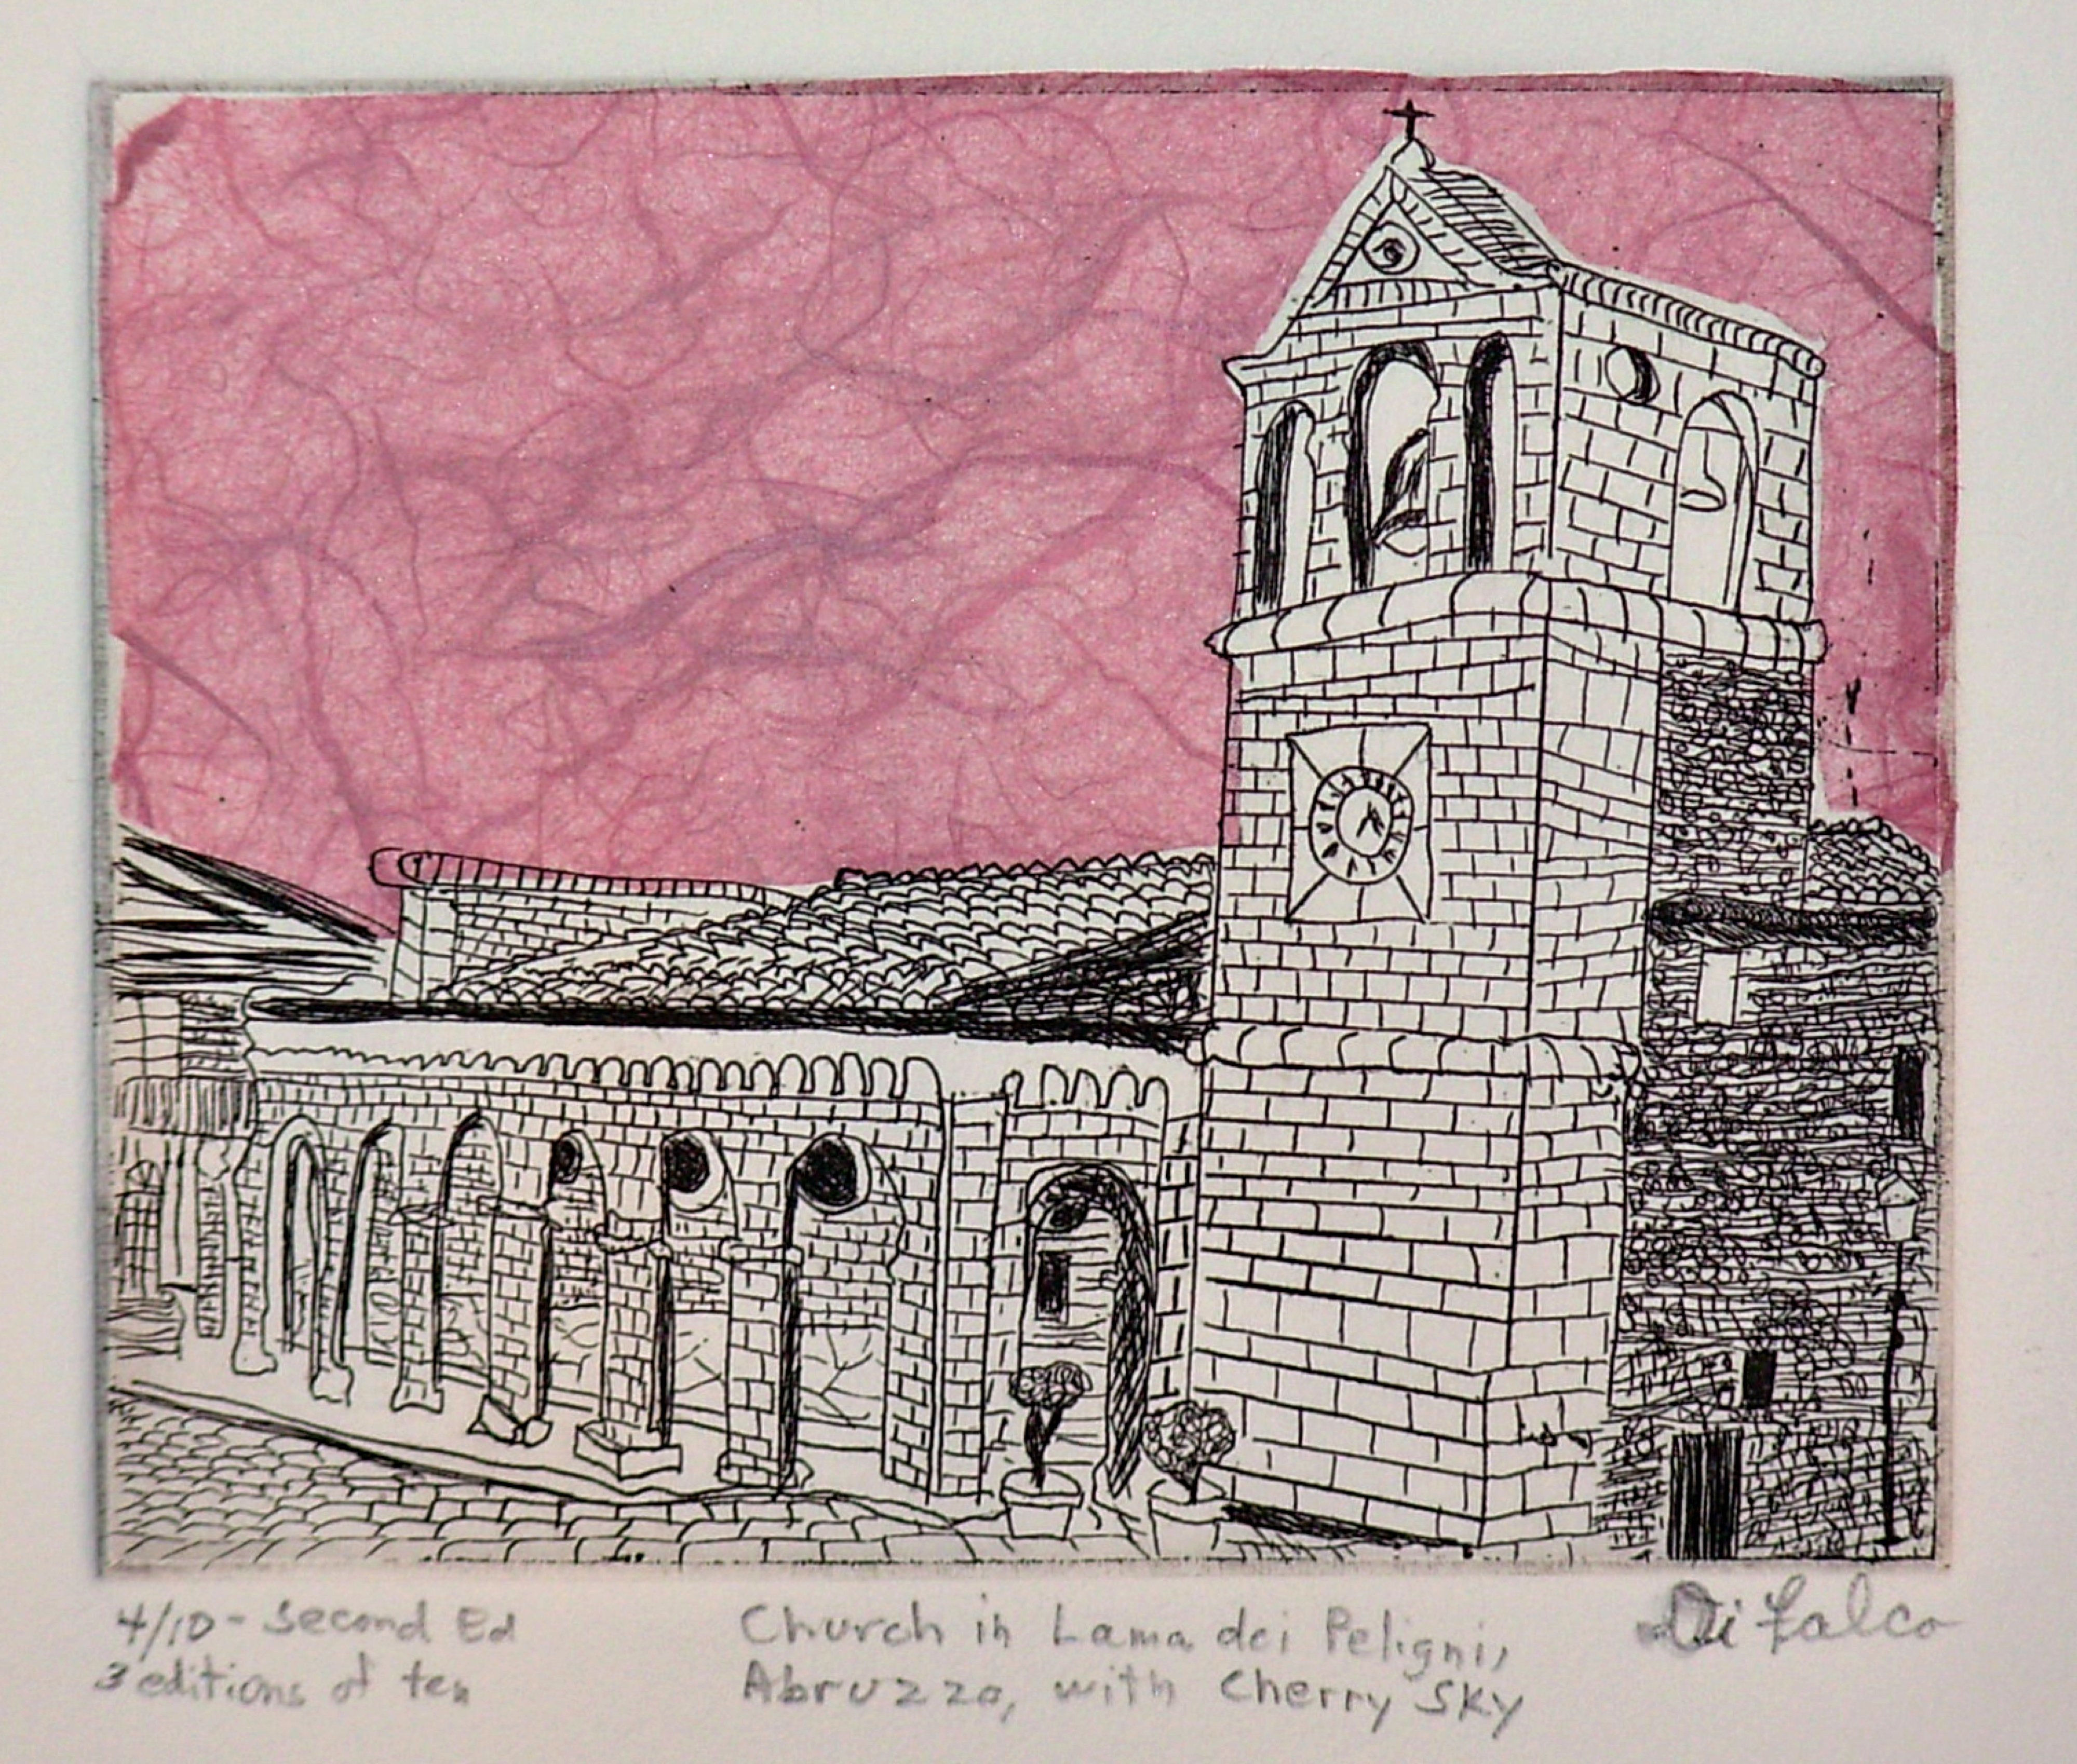 Jerry  Di Falco, 'Church In Lama Dei Pelign...', 2010, original Printmaking Intaglio, 10 x 9  inches. Artwork description: 15375 FULL TITLE IS, Church In Lama dei Peligni Abruzzo with Cherry Sky. This intaglio etching also uses the Chine colle, or Chinese pasting, technique to add color to the print via the use of mulberry bark paper from Thailand treated with methyl cellulose. Media include black oil- ...